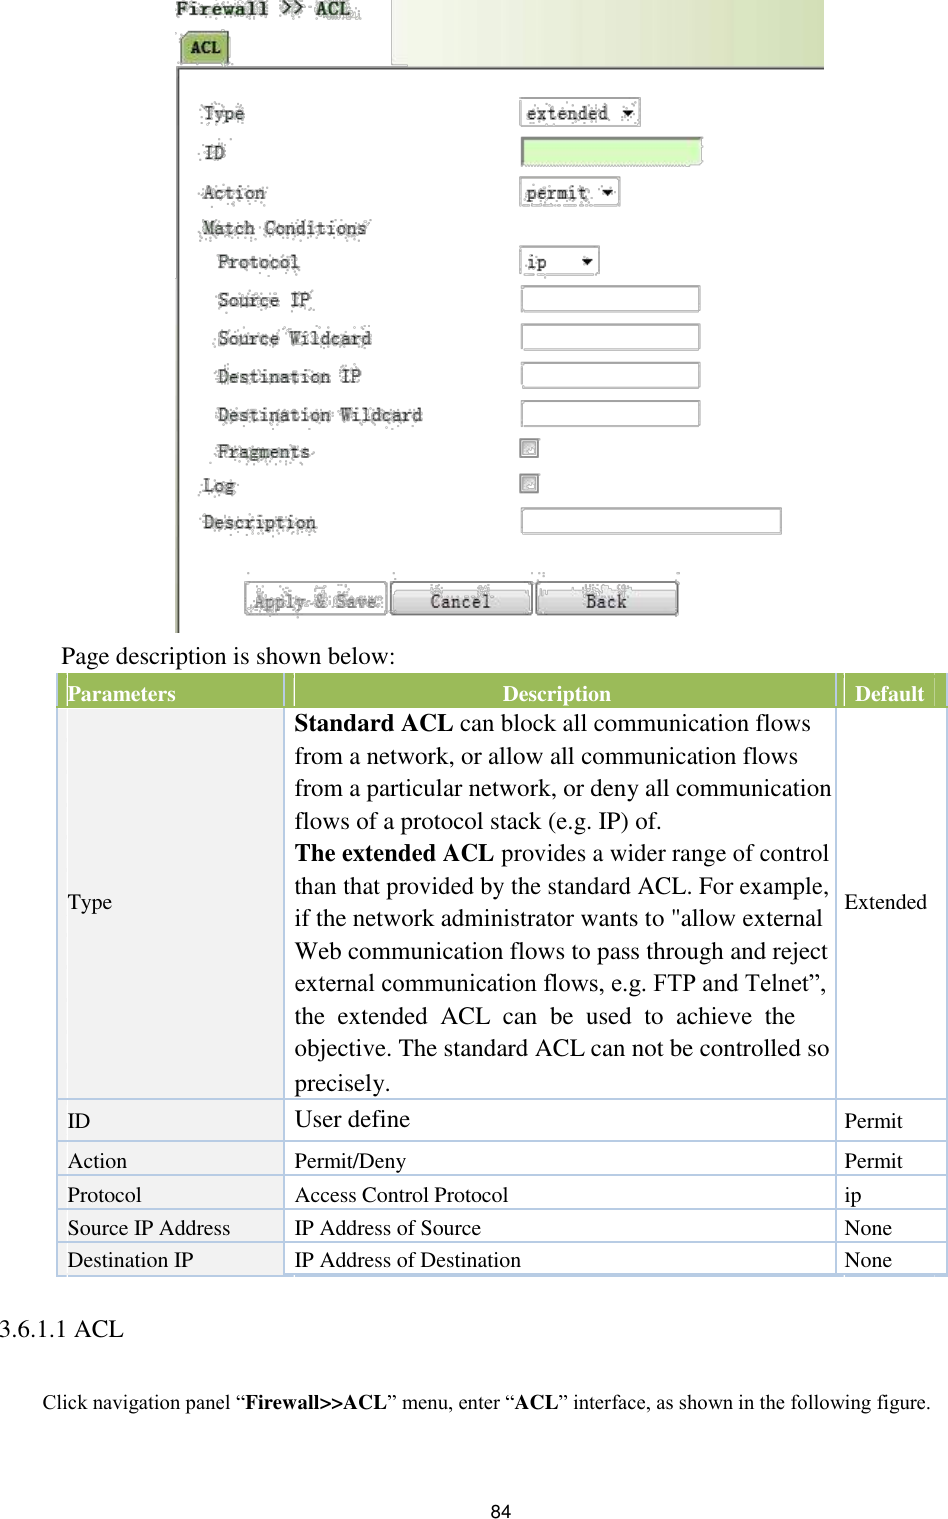                              Page description is shown below:    Parameters   Description   Default              Standard ACL can block all communication flows         from a network, or allow all communication flows         from a particular network, or deny all communication         flows of a protocol stack (e.g. IP) of.         The extended ACL provides a wider range of control      Type   than that provided by the standard ACL. For example,  Extended     if the network administrator wants to &quot;allow external               Web communication flows to pass through and reject         external communication flows, e.g. FTP and Telnet”,         the  extended  ACL  can  be  used  to  achieve  the         objective. The standard ACL can not be controlled so         precisely.      ID   User define  Permit             Action   Permit/Deny  Permit   Protocol   Access Control Protocol  ip   Source IP Address   IP Address of Source  None   Destination IP   IP Address of Destination  None           3.6.1.1 ACL         Click navigation panel “Firewall&gt;&gt;ACL” menu, enter “ACL” interface, as shown in the following figure.     84 